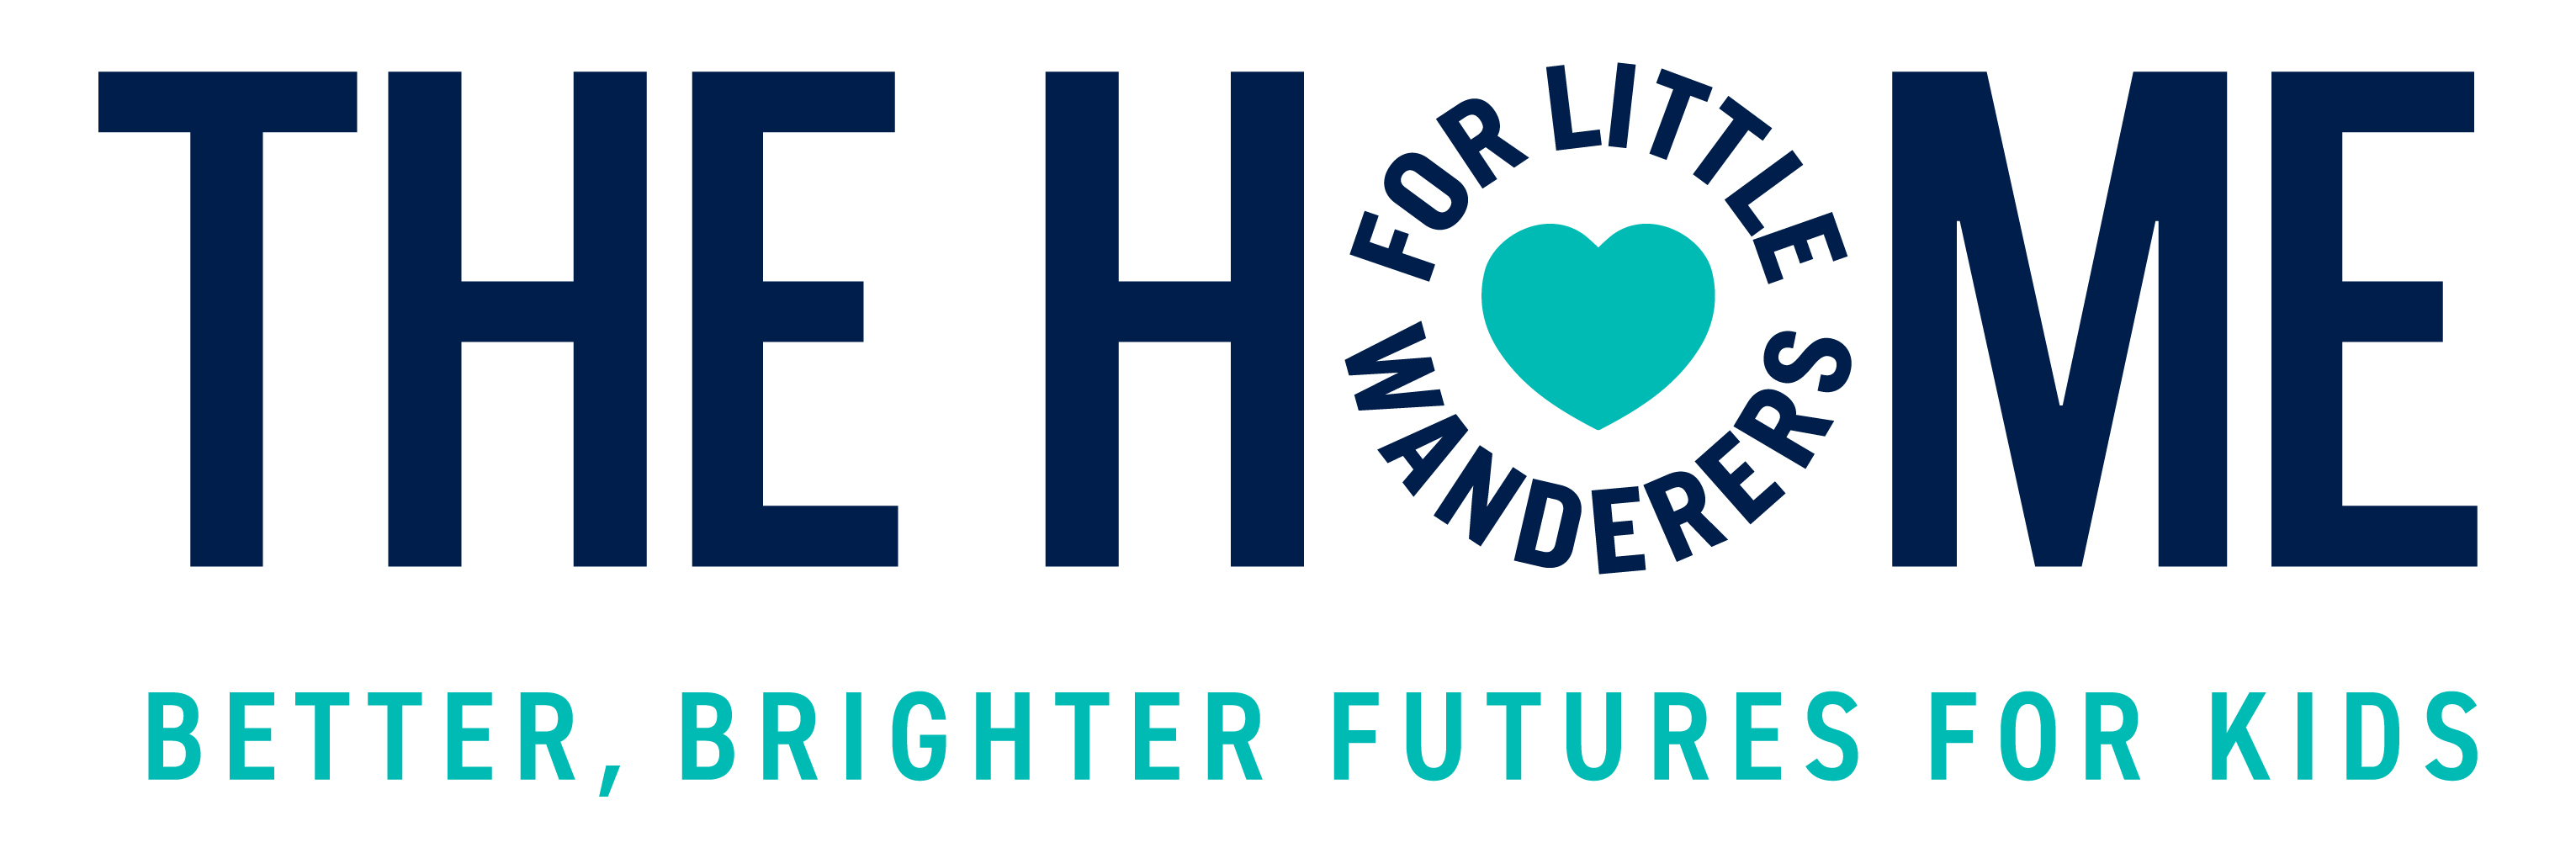 Home for little wanderers Logo